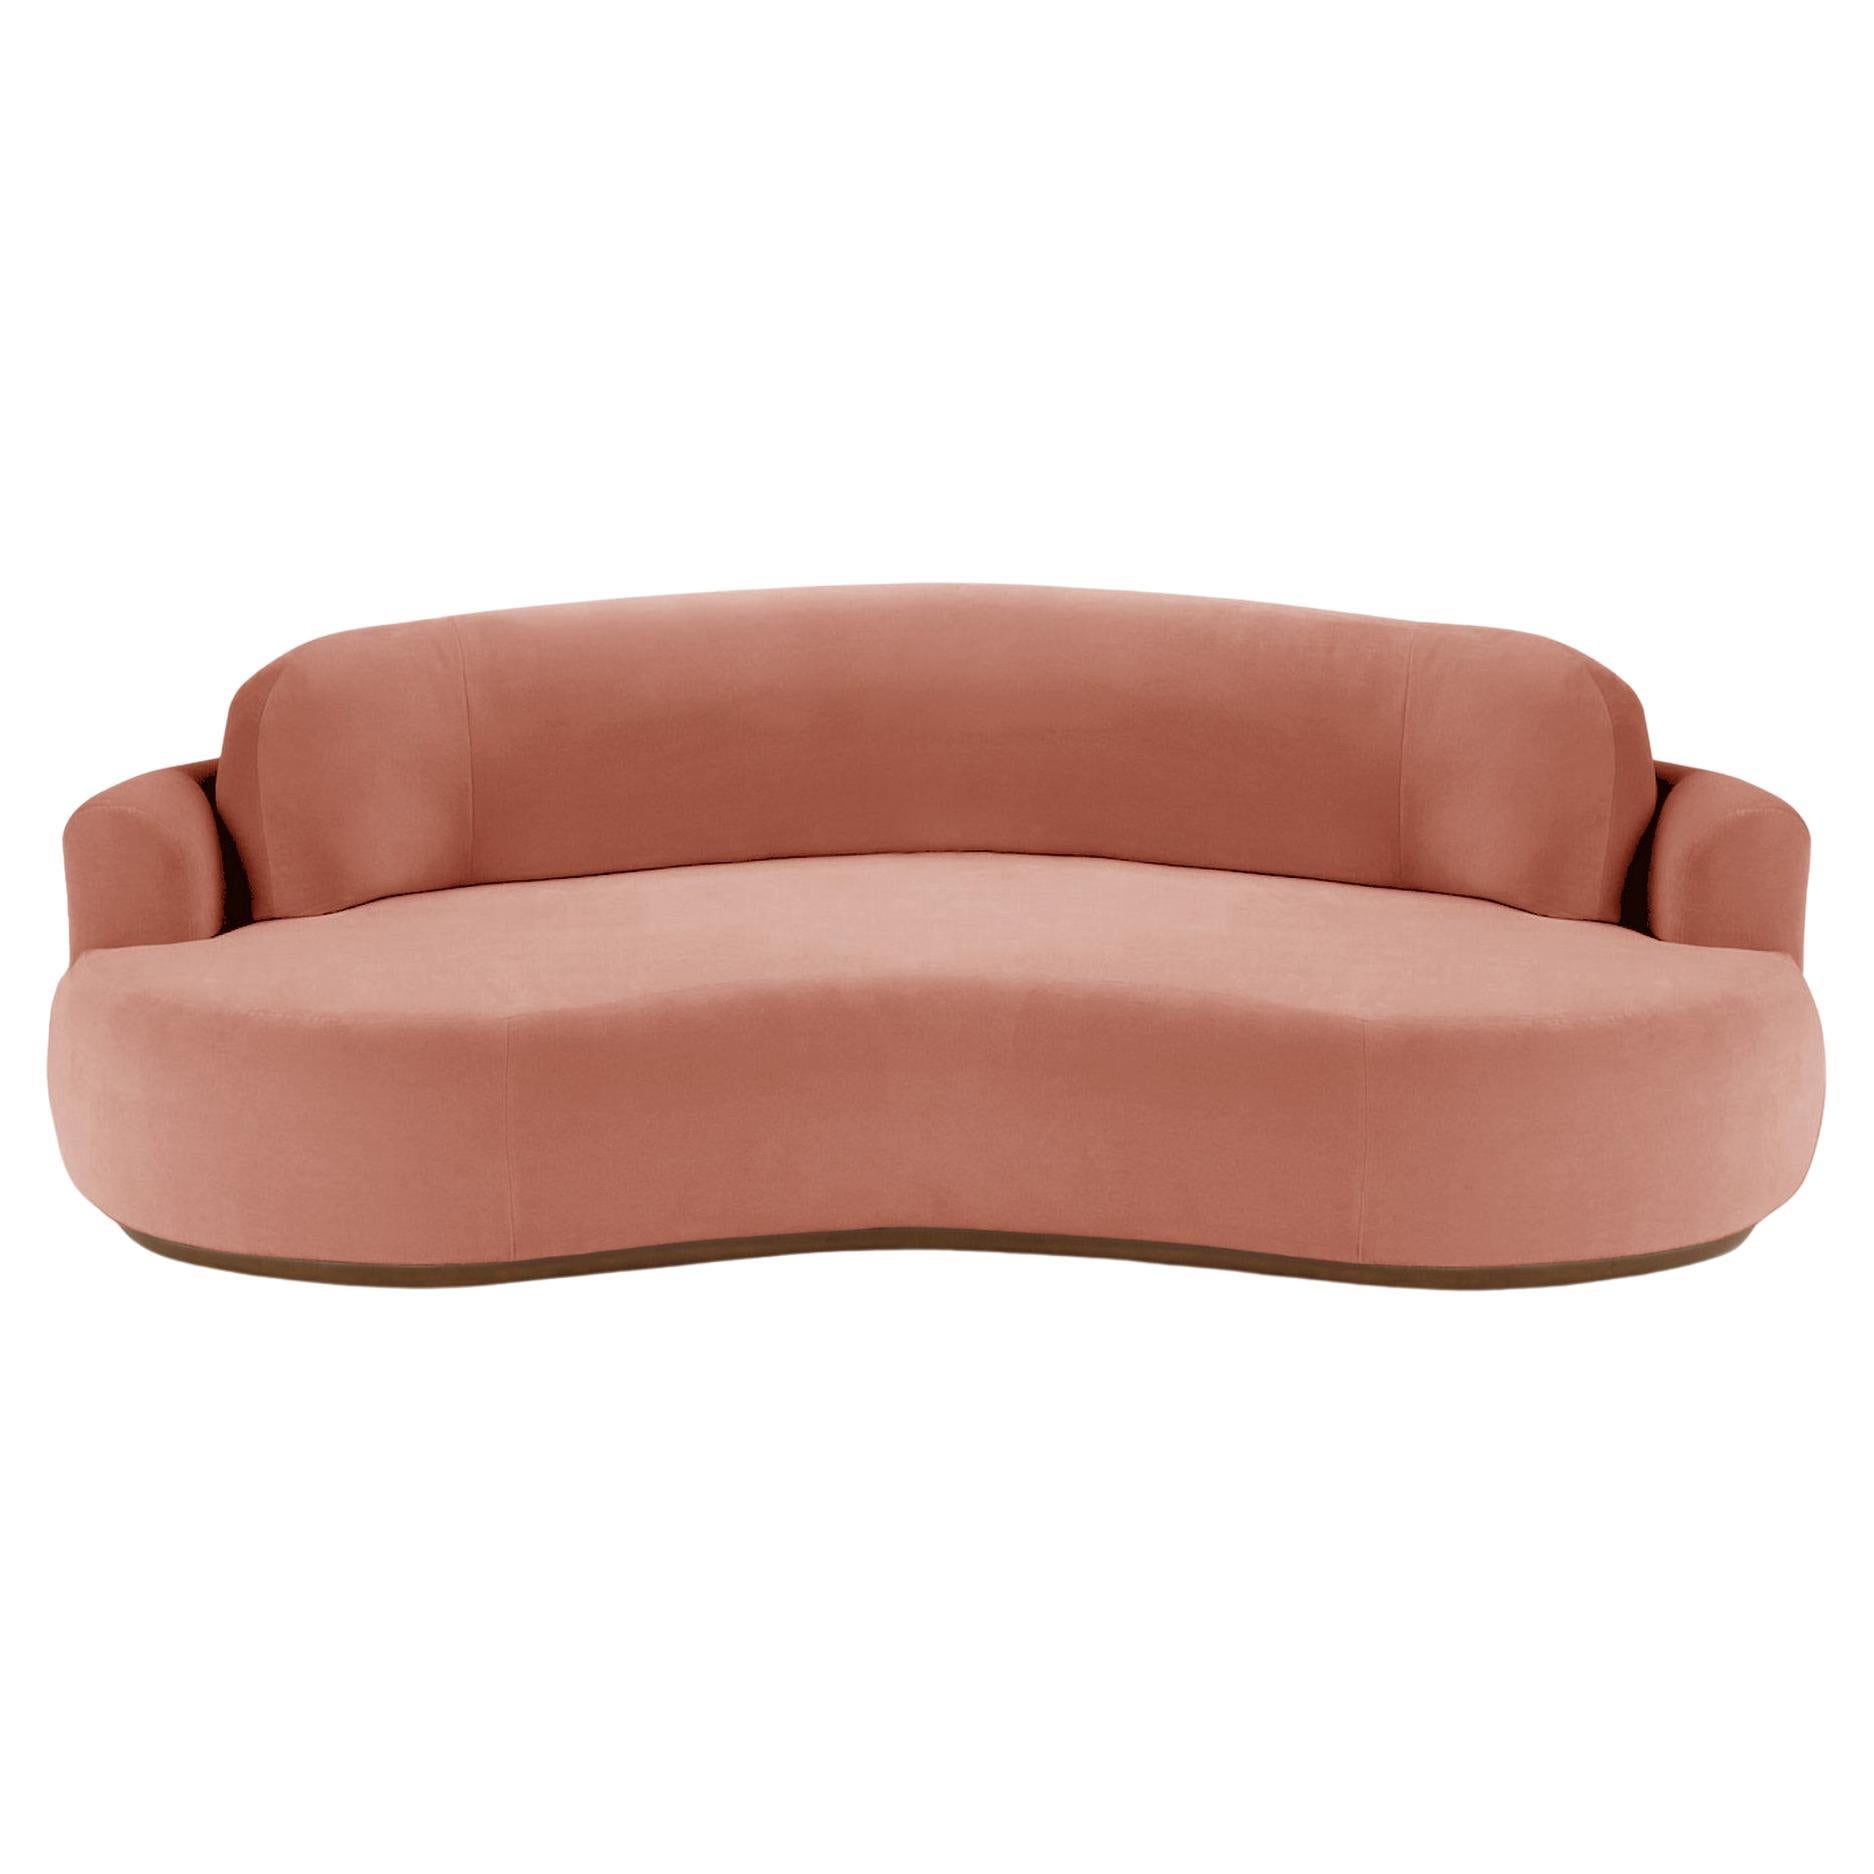 Naked Round Sofa, Small with Beech Ash-056-1 and Paris Brick